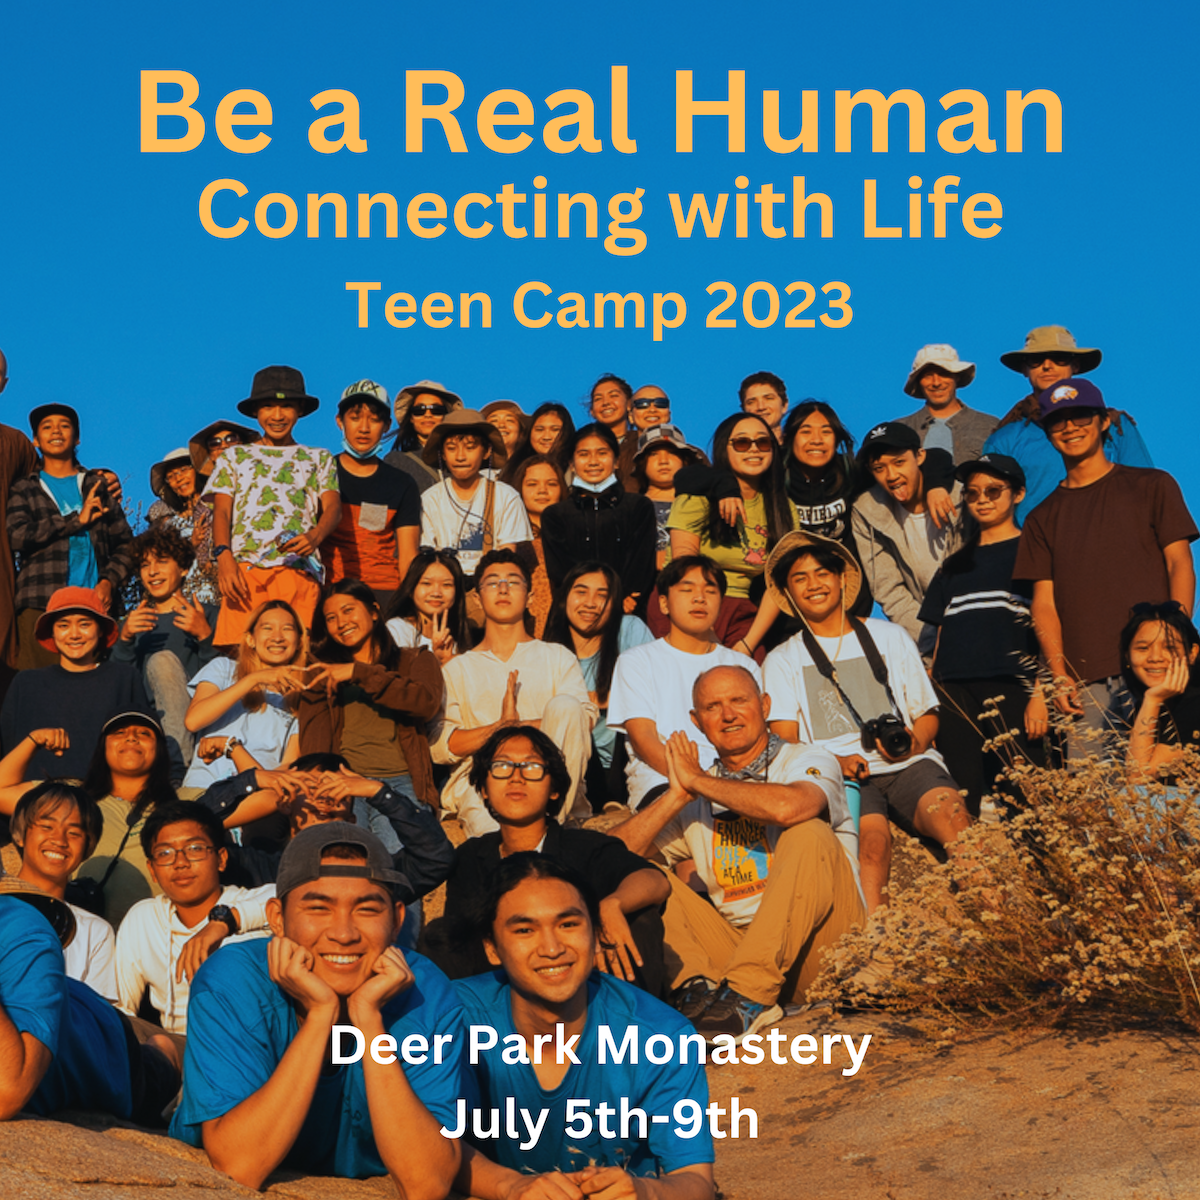 Be a Real Human, Connecting with Life